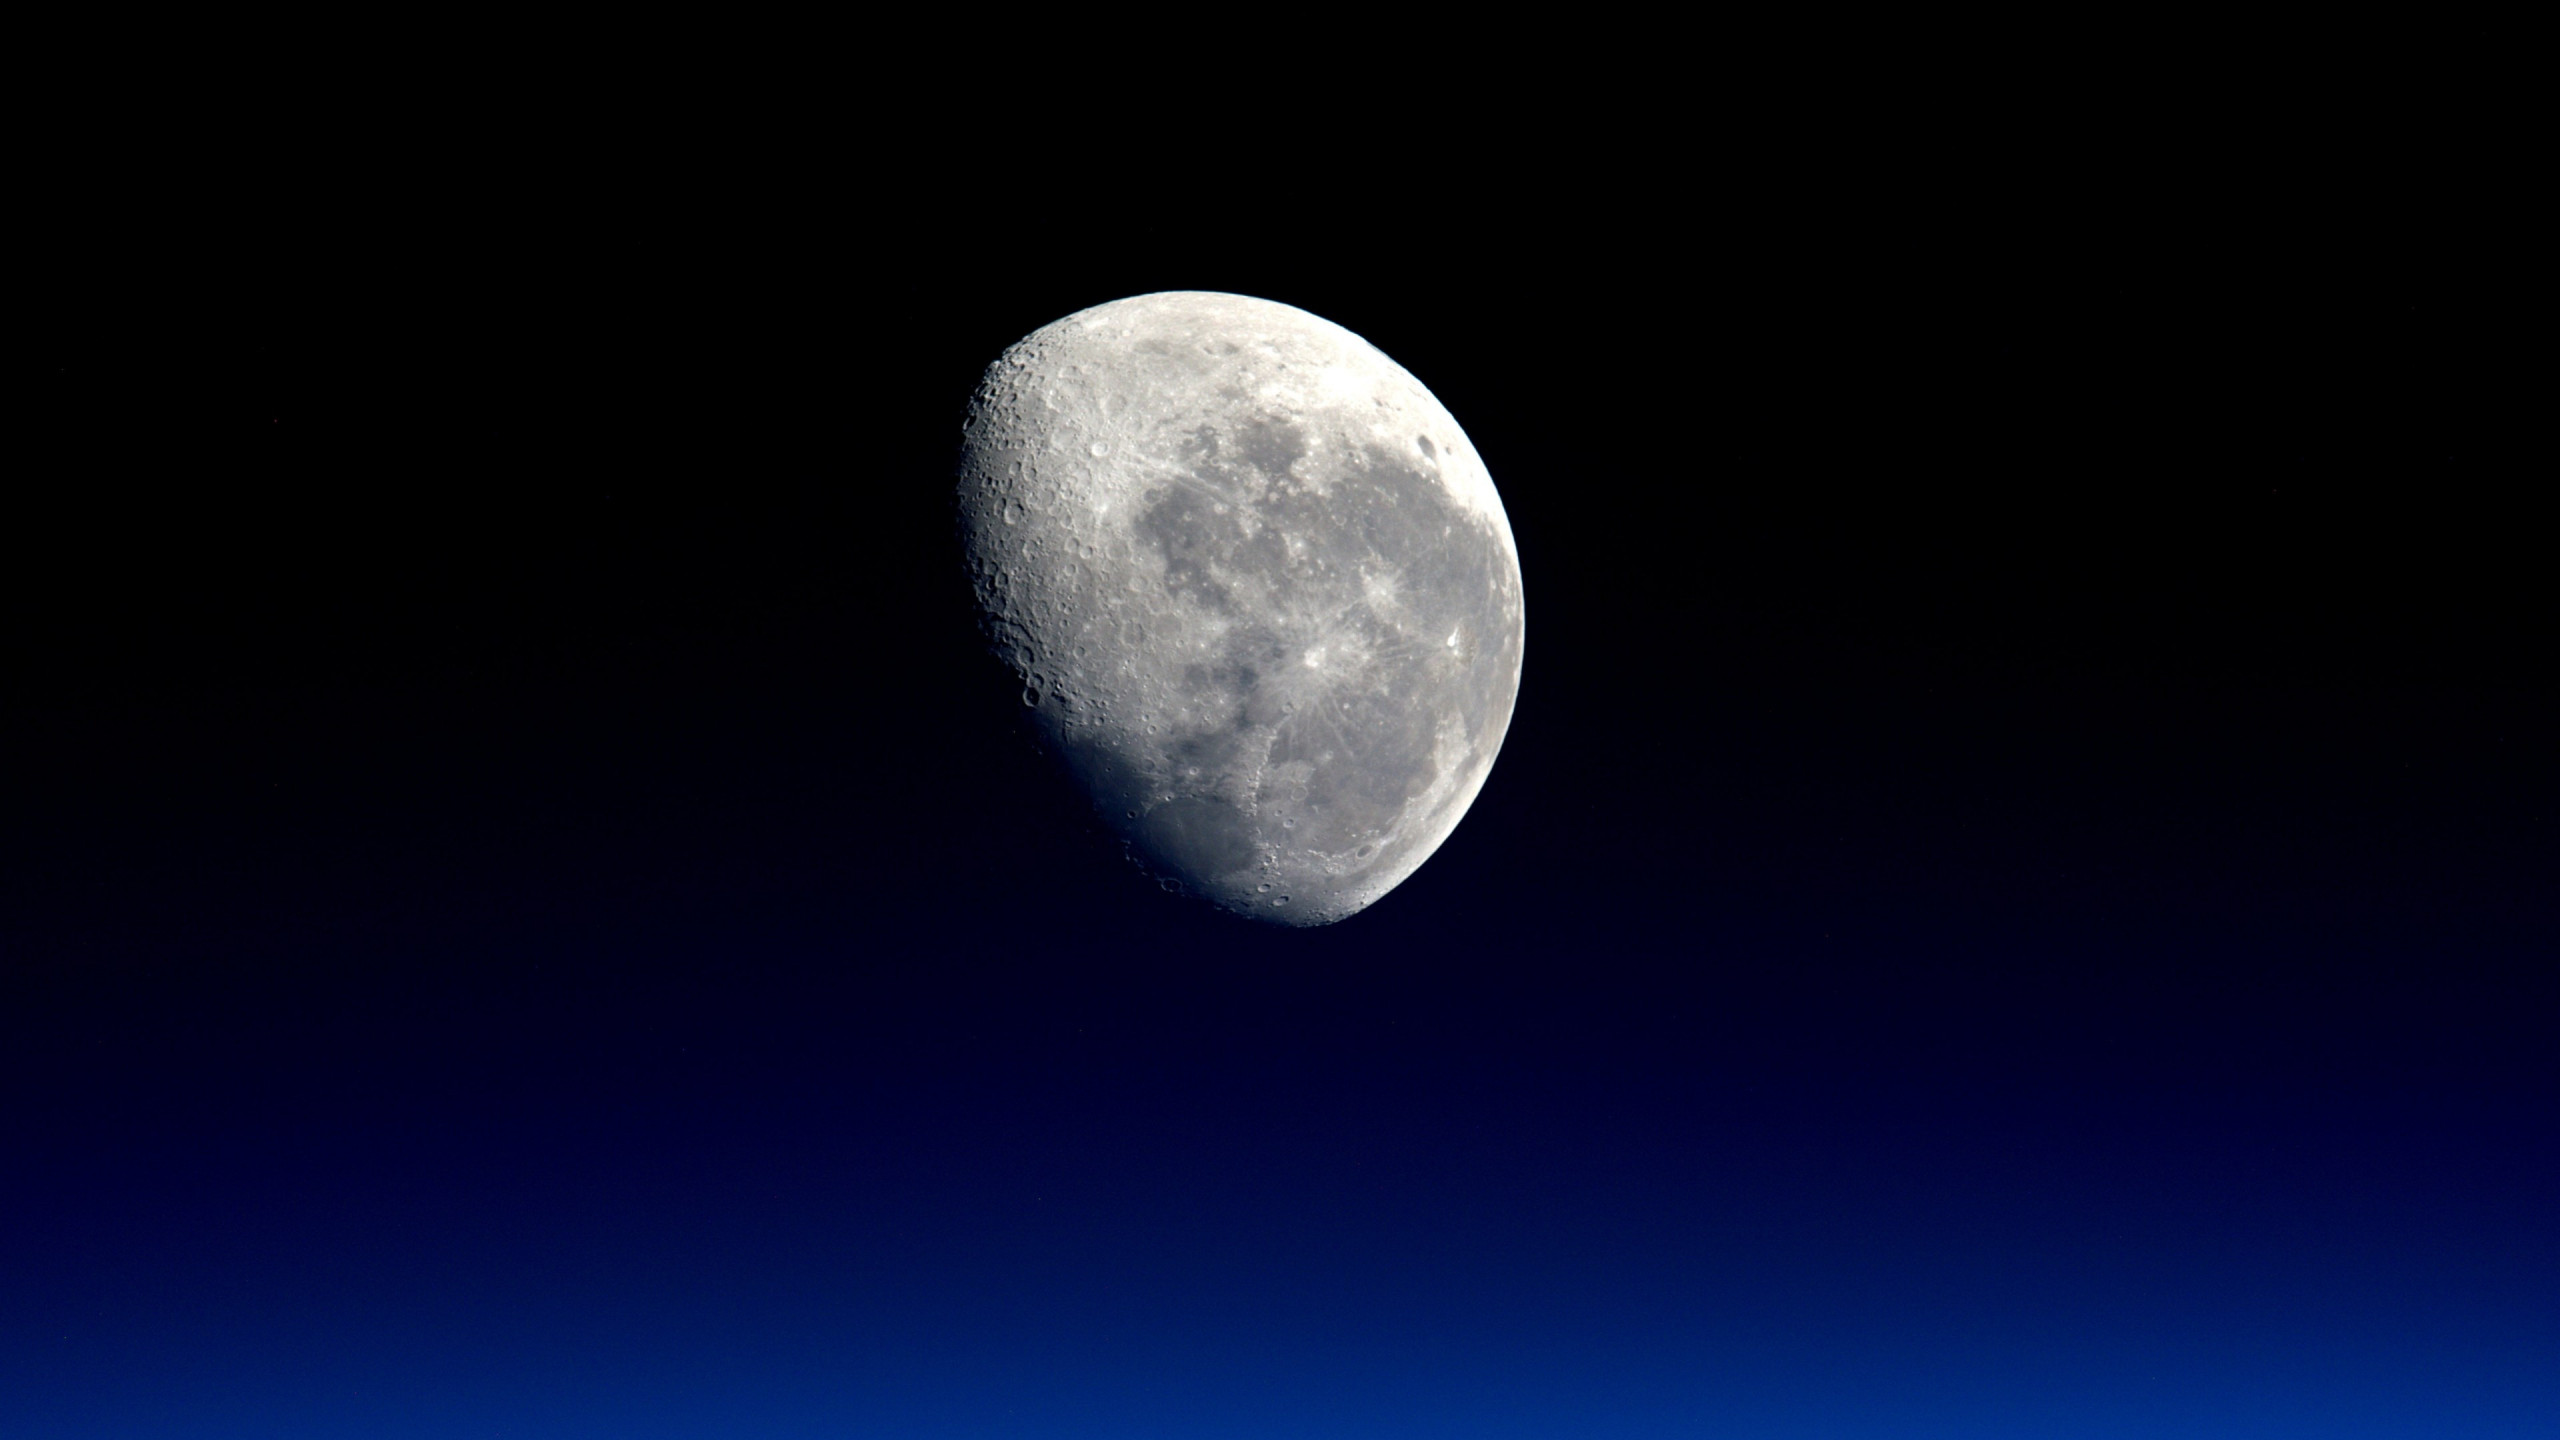 Our natural satellite: The Moon wallpaper 2560x1440